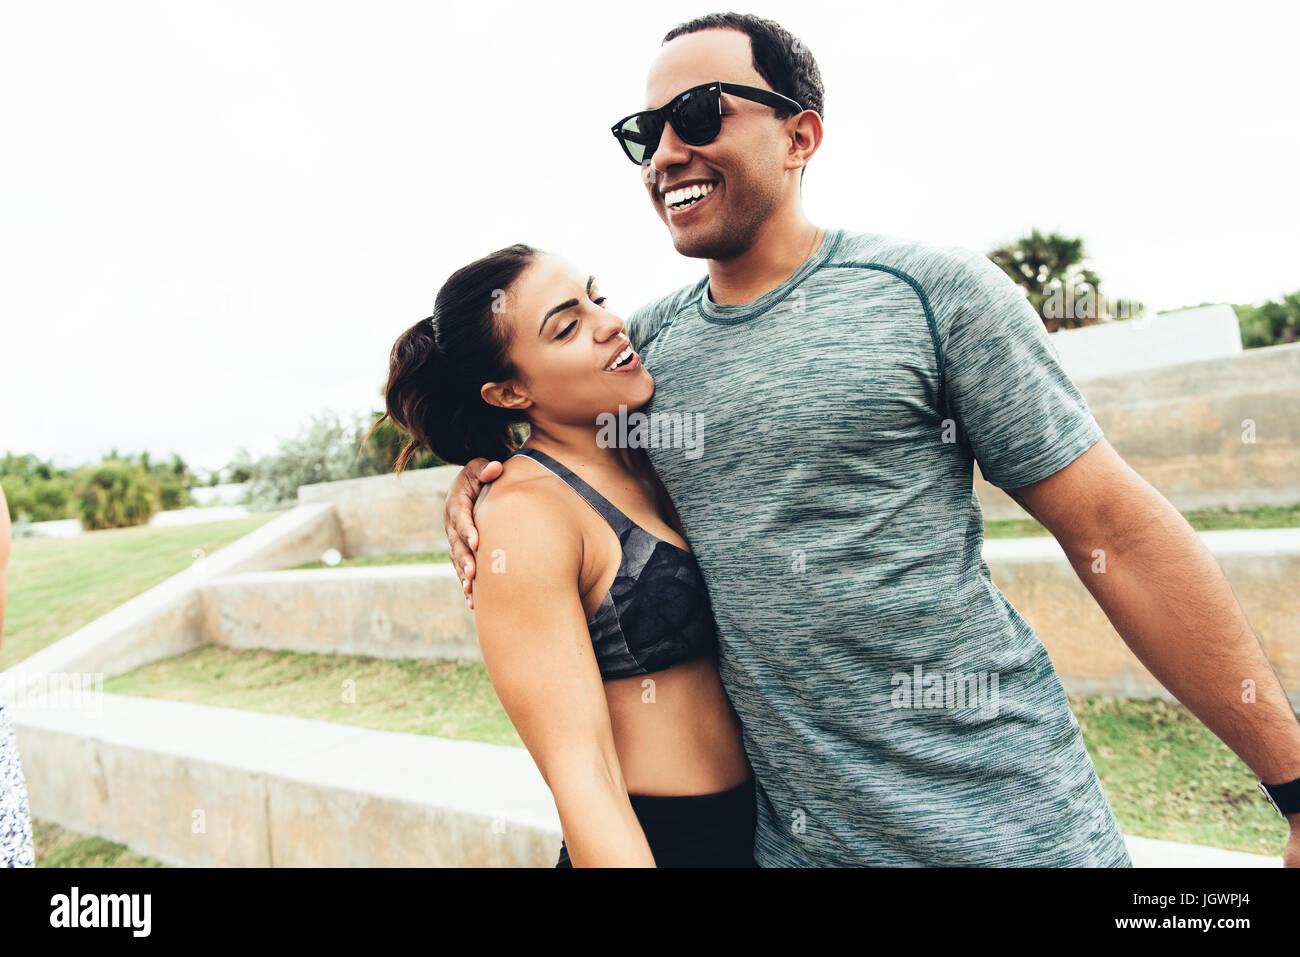 Young man and woman wearing sports clothing, outdoors, hugging, South Point Park, Miami Beach, Florida, USA Stock Photo